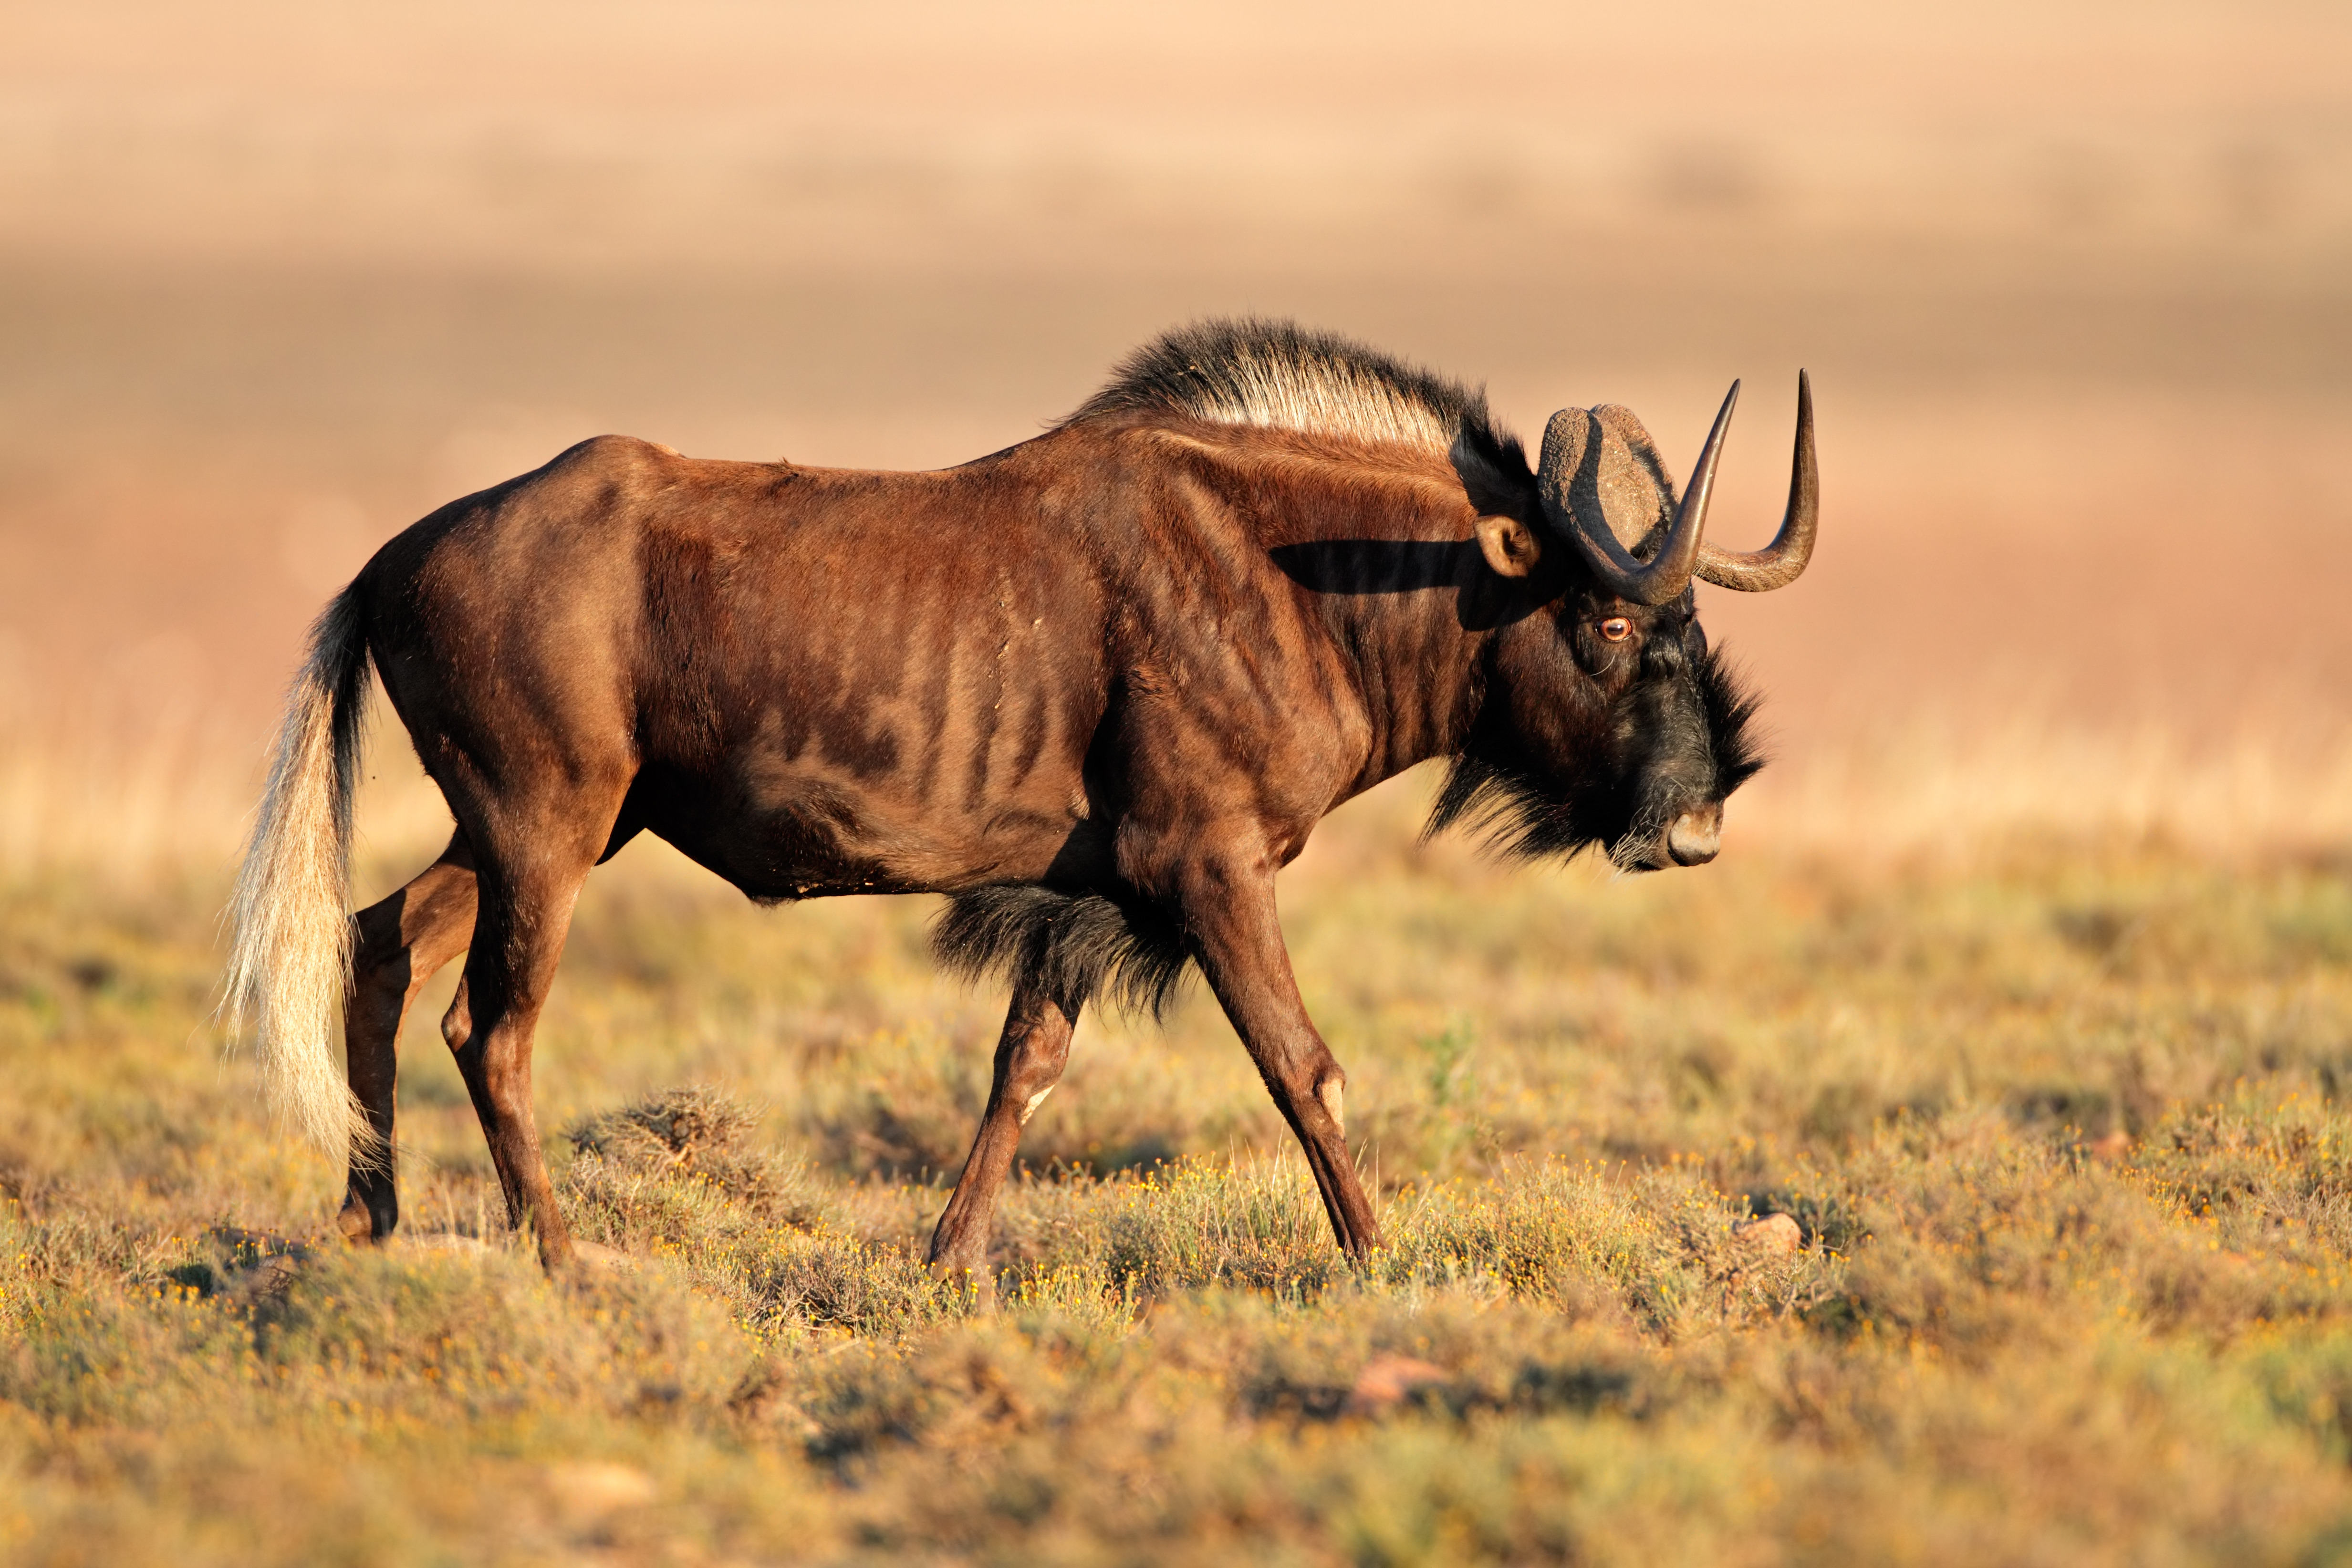 The Black Wildebeest in Africa: Bringing Home a Trophy Bull ...